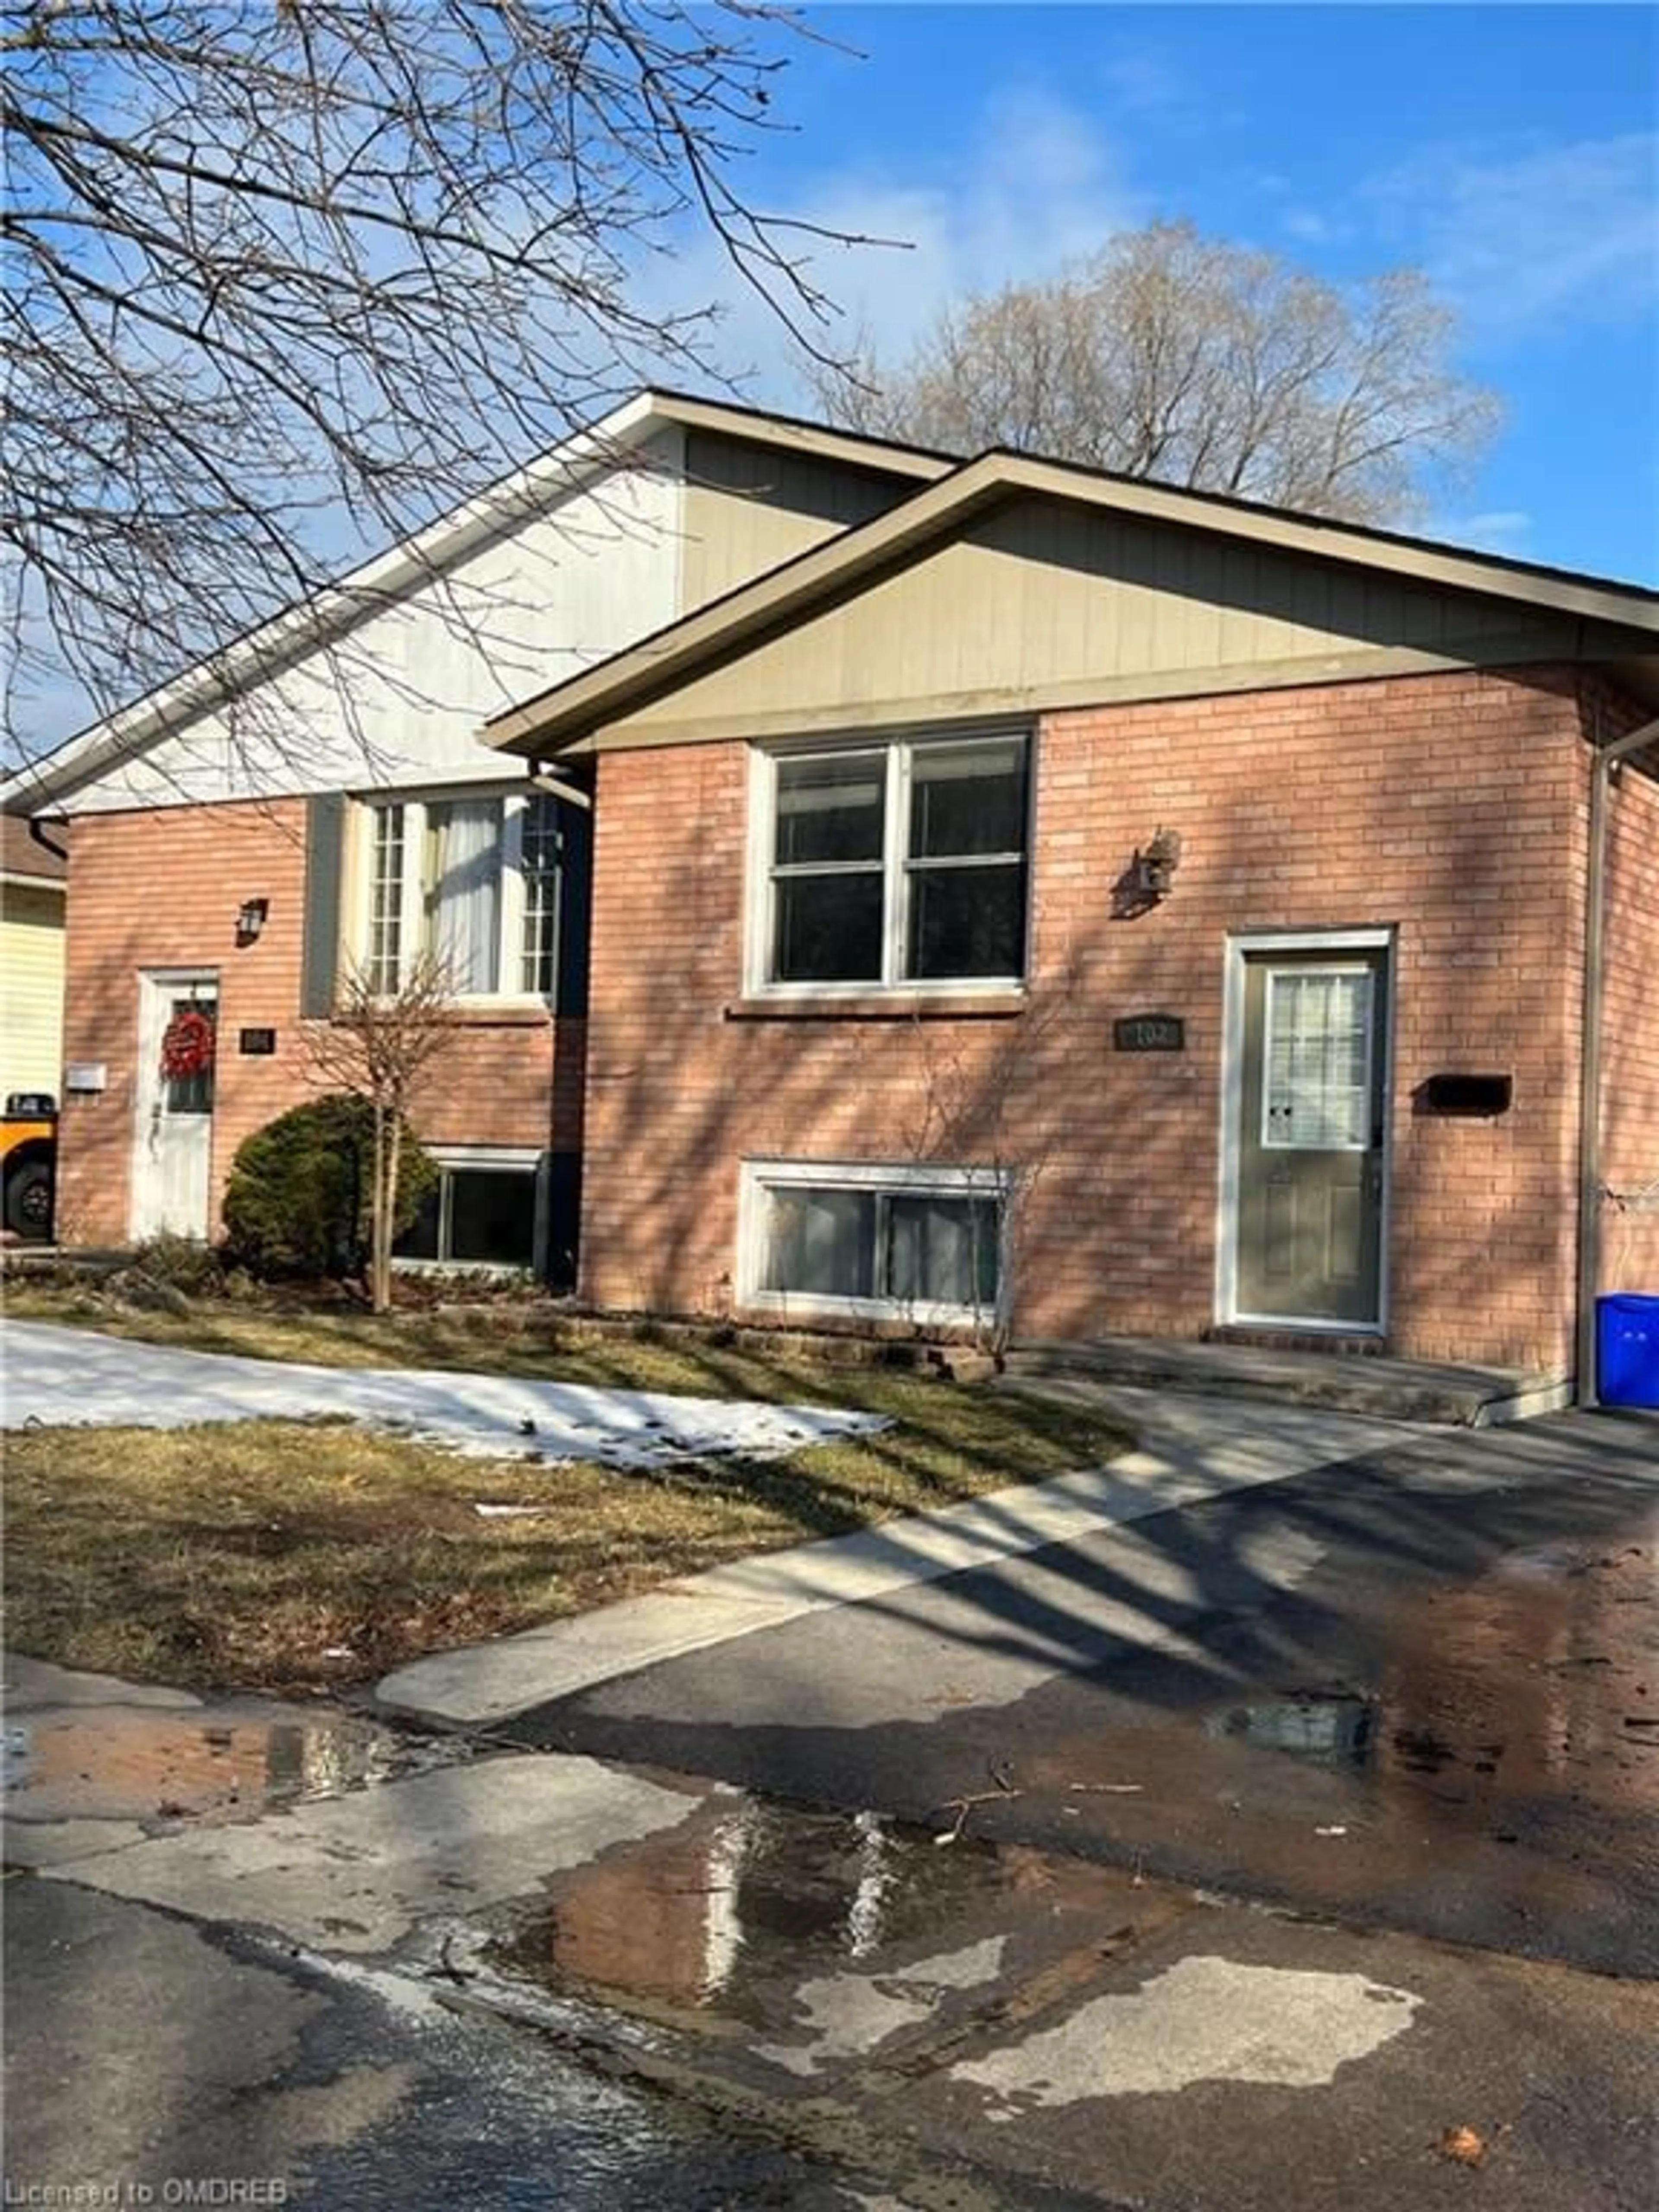 Home with brick exterior material for 102 Elma St, St. Catharines Ontario L2N 6Z7